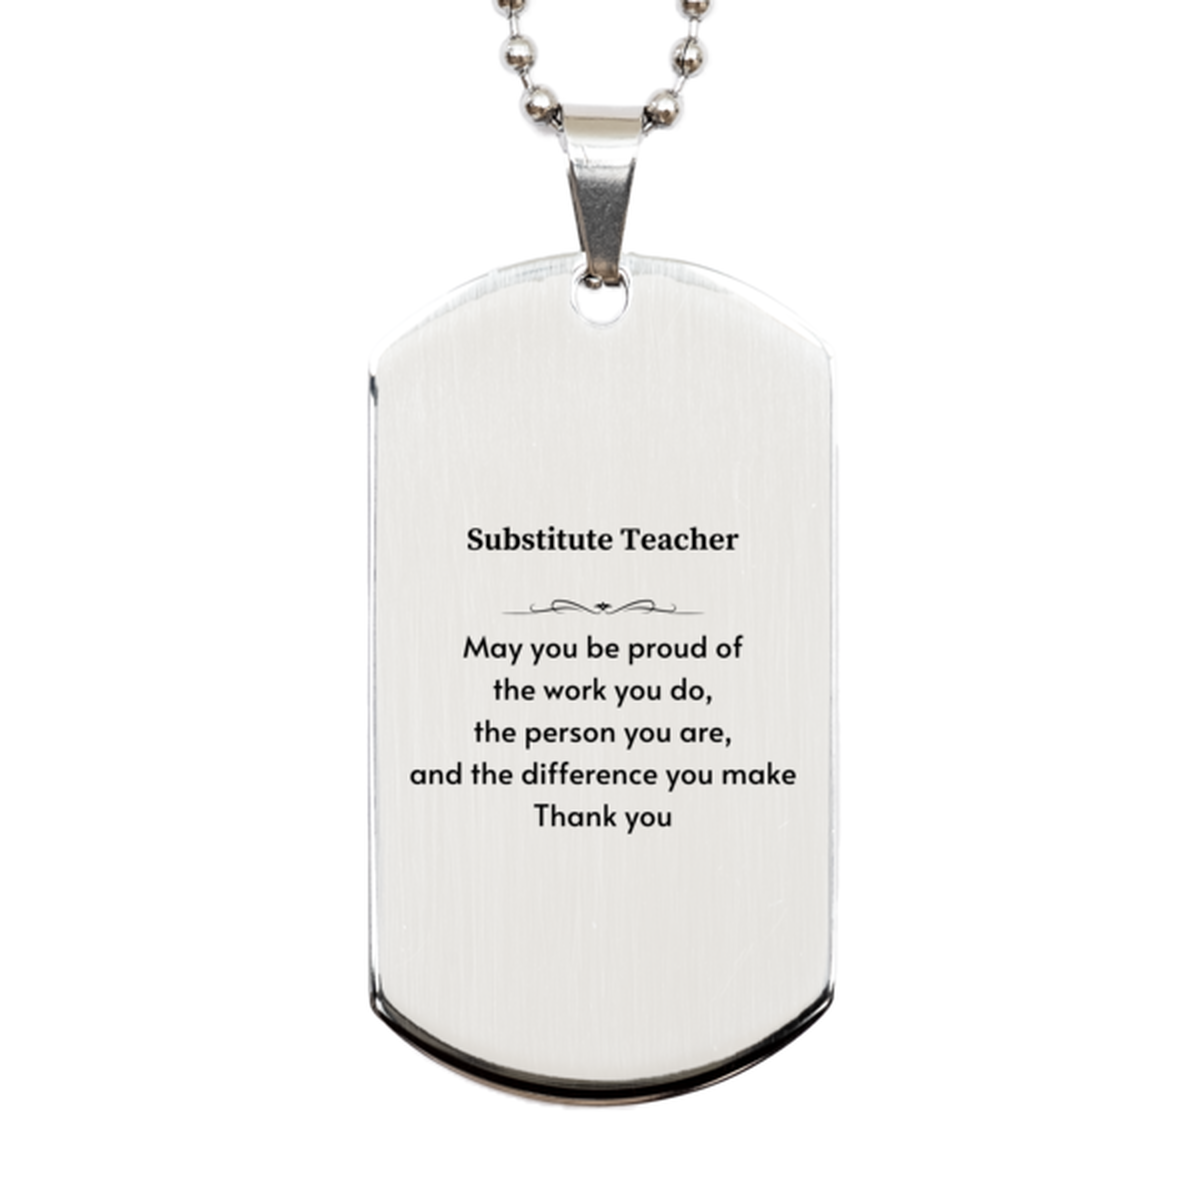 Heartwarming Silver Dog Tag Retirement Coworkers Gifts for Substitute Teacher, Substitute Teacher May You be proud of the work you do, the person you are Gifts for Boss Men Women Friends